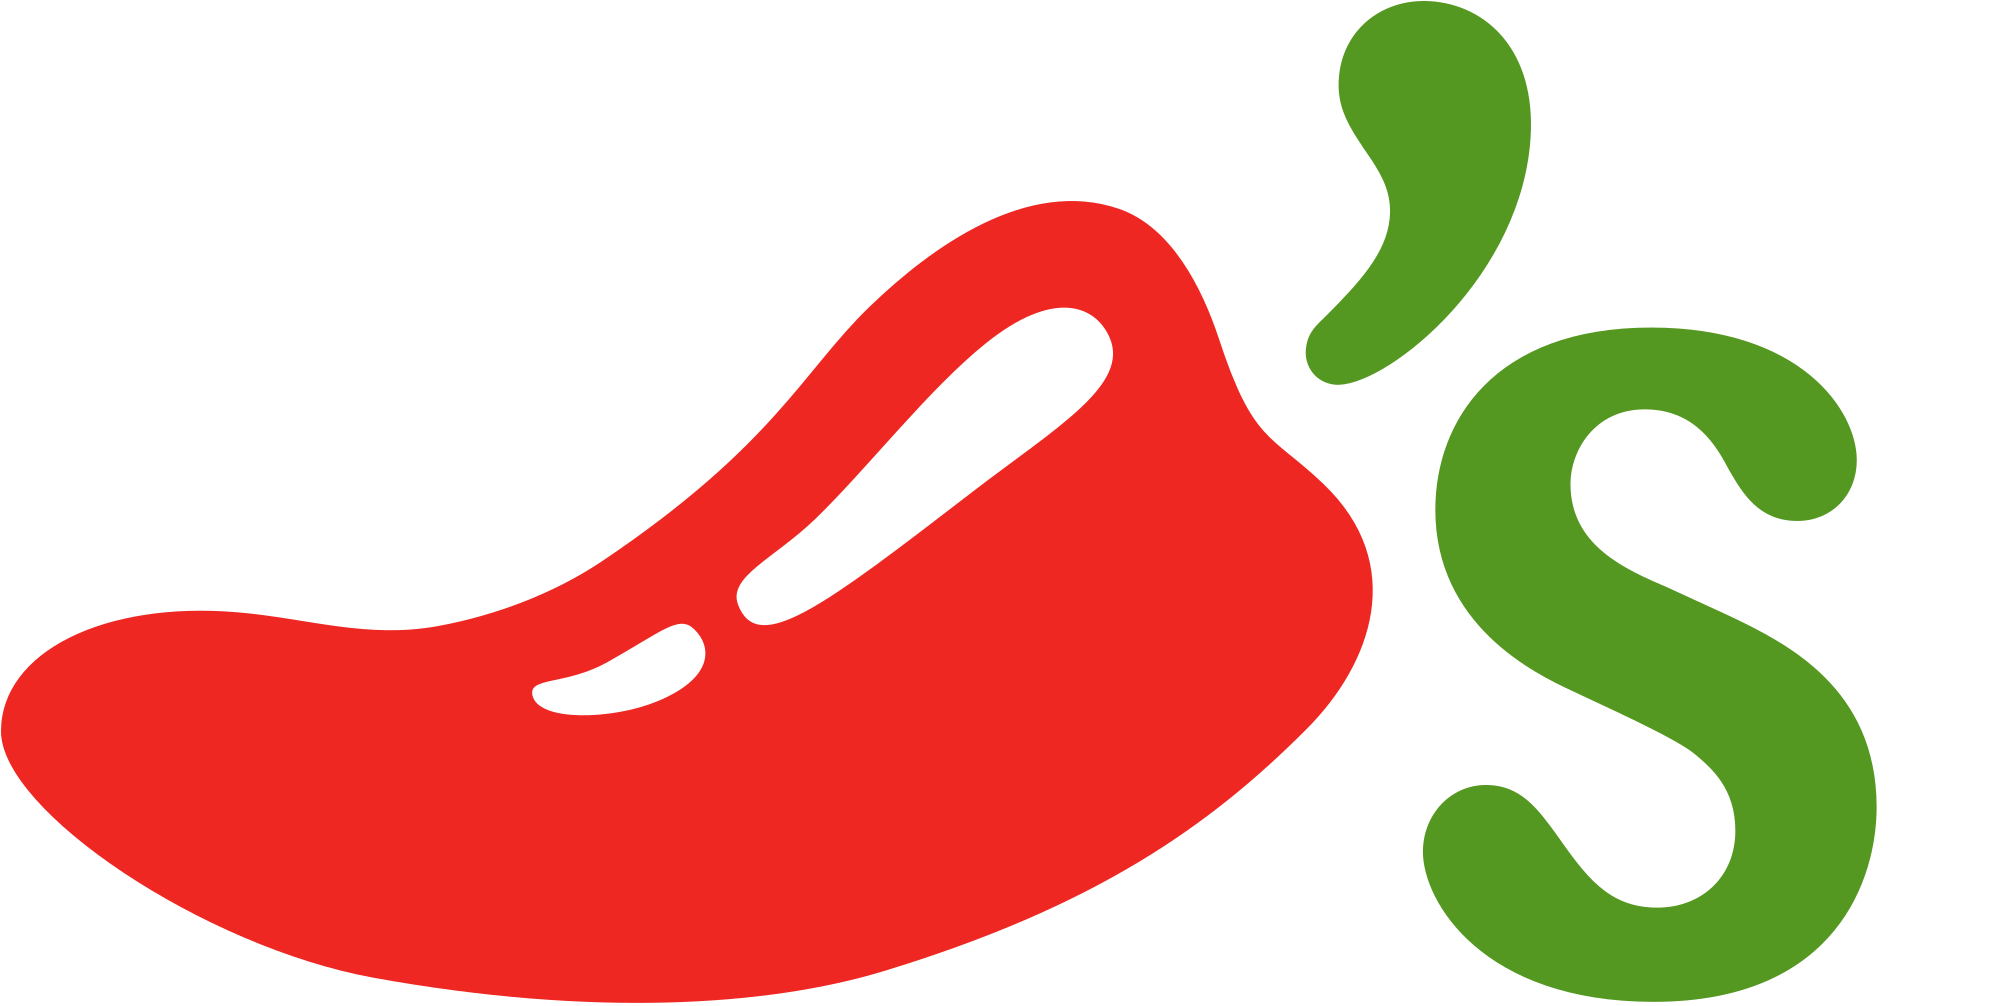 The 3 pillars of engagement that helped Chili’s boost stock from 4 to